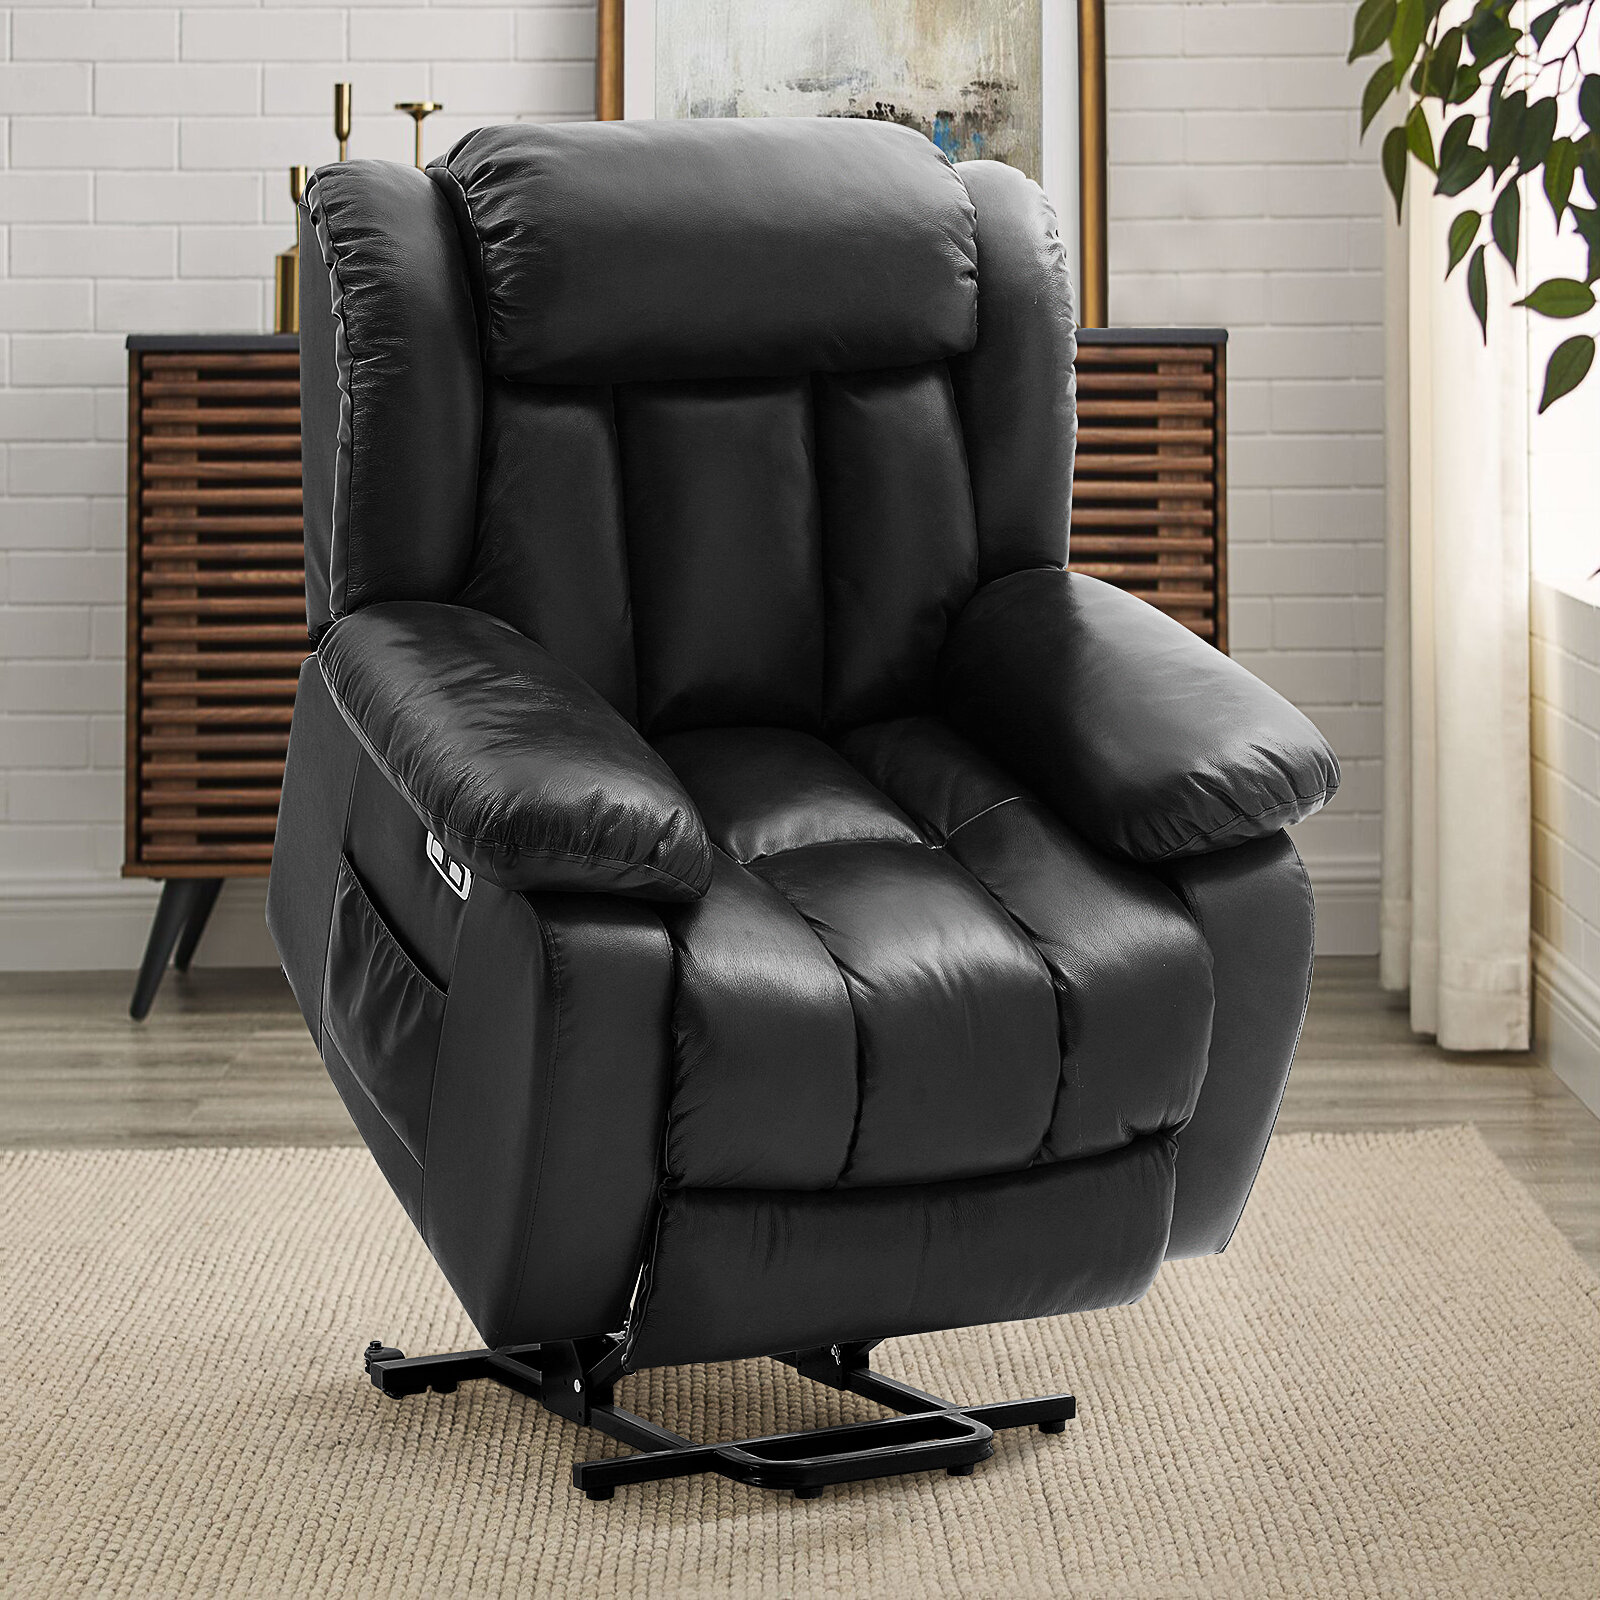 Creatuis Lift Chair with Adjustable Lumbar Support,Power Lift Recliner Chair for Elderly,Lays Flat,Three Okin Motor,Cup Holder,Leather(Black)